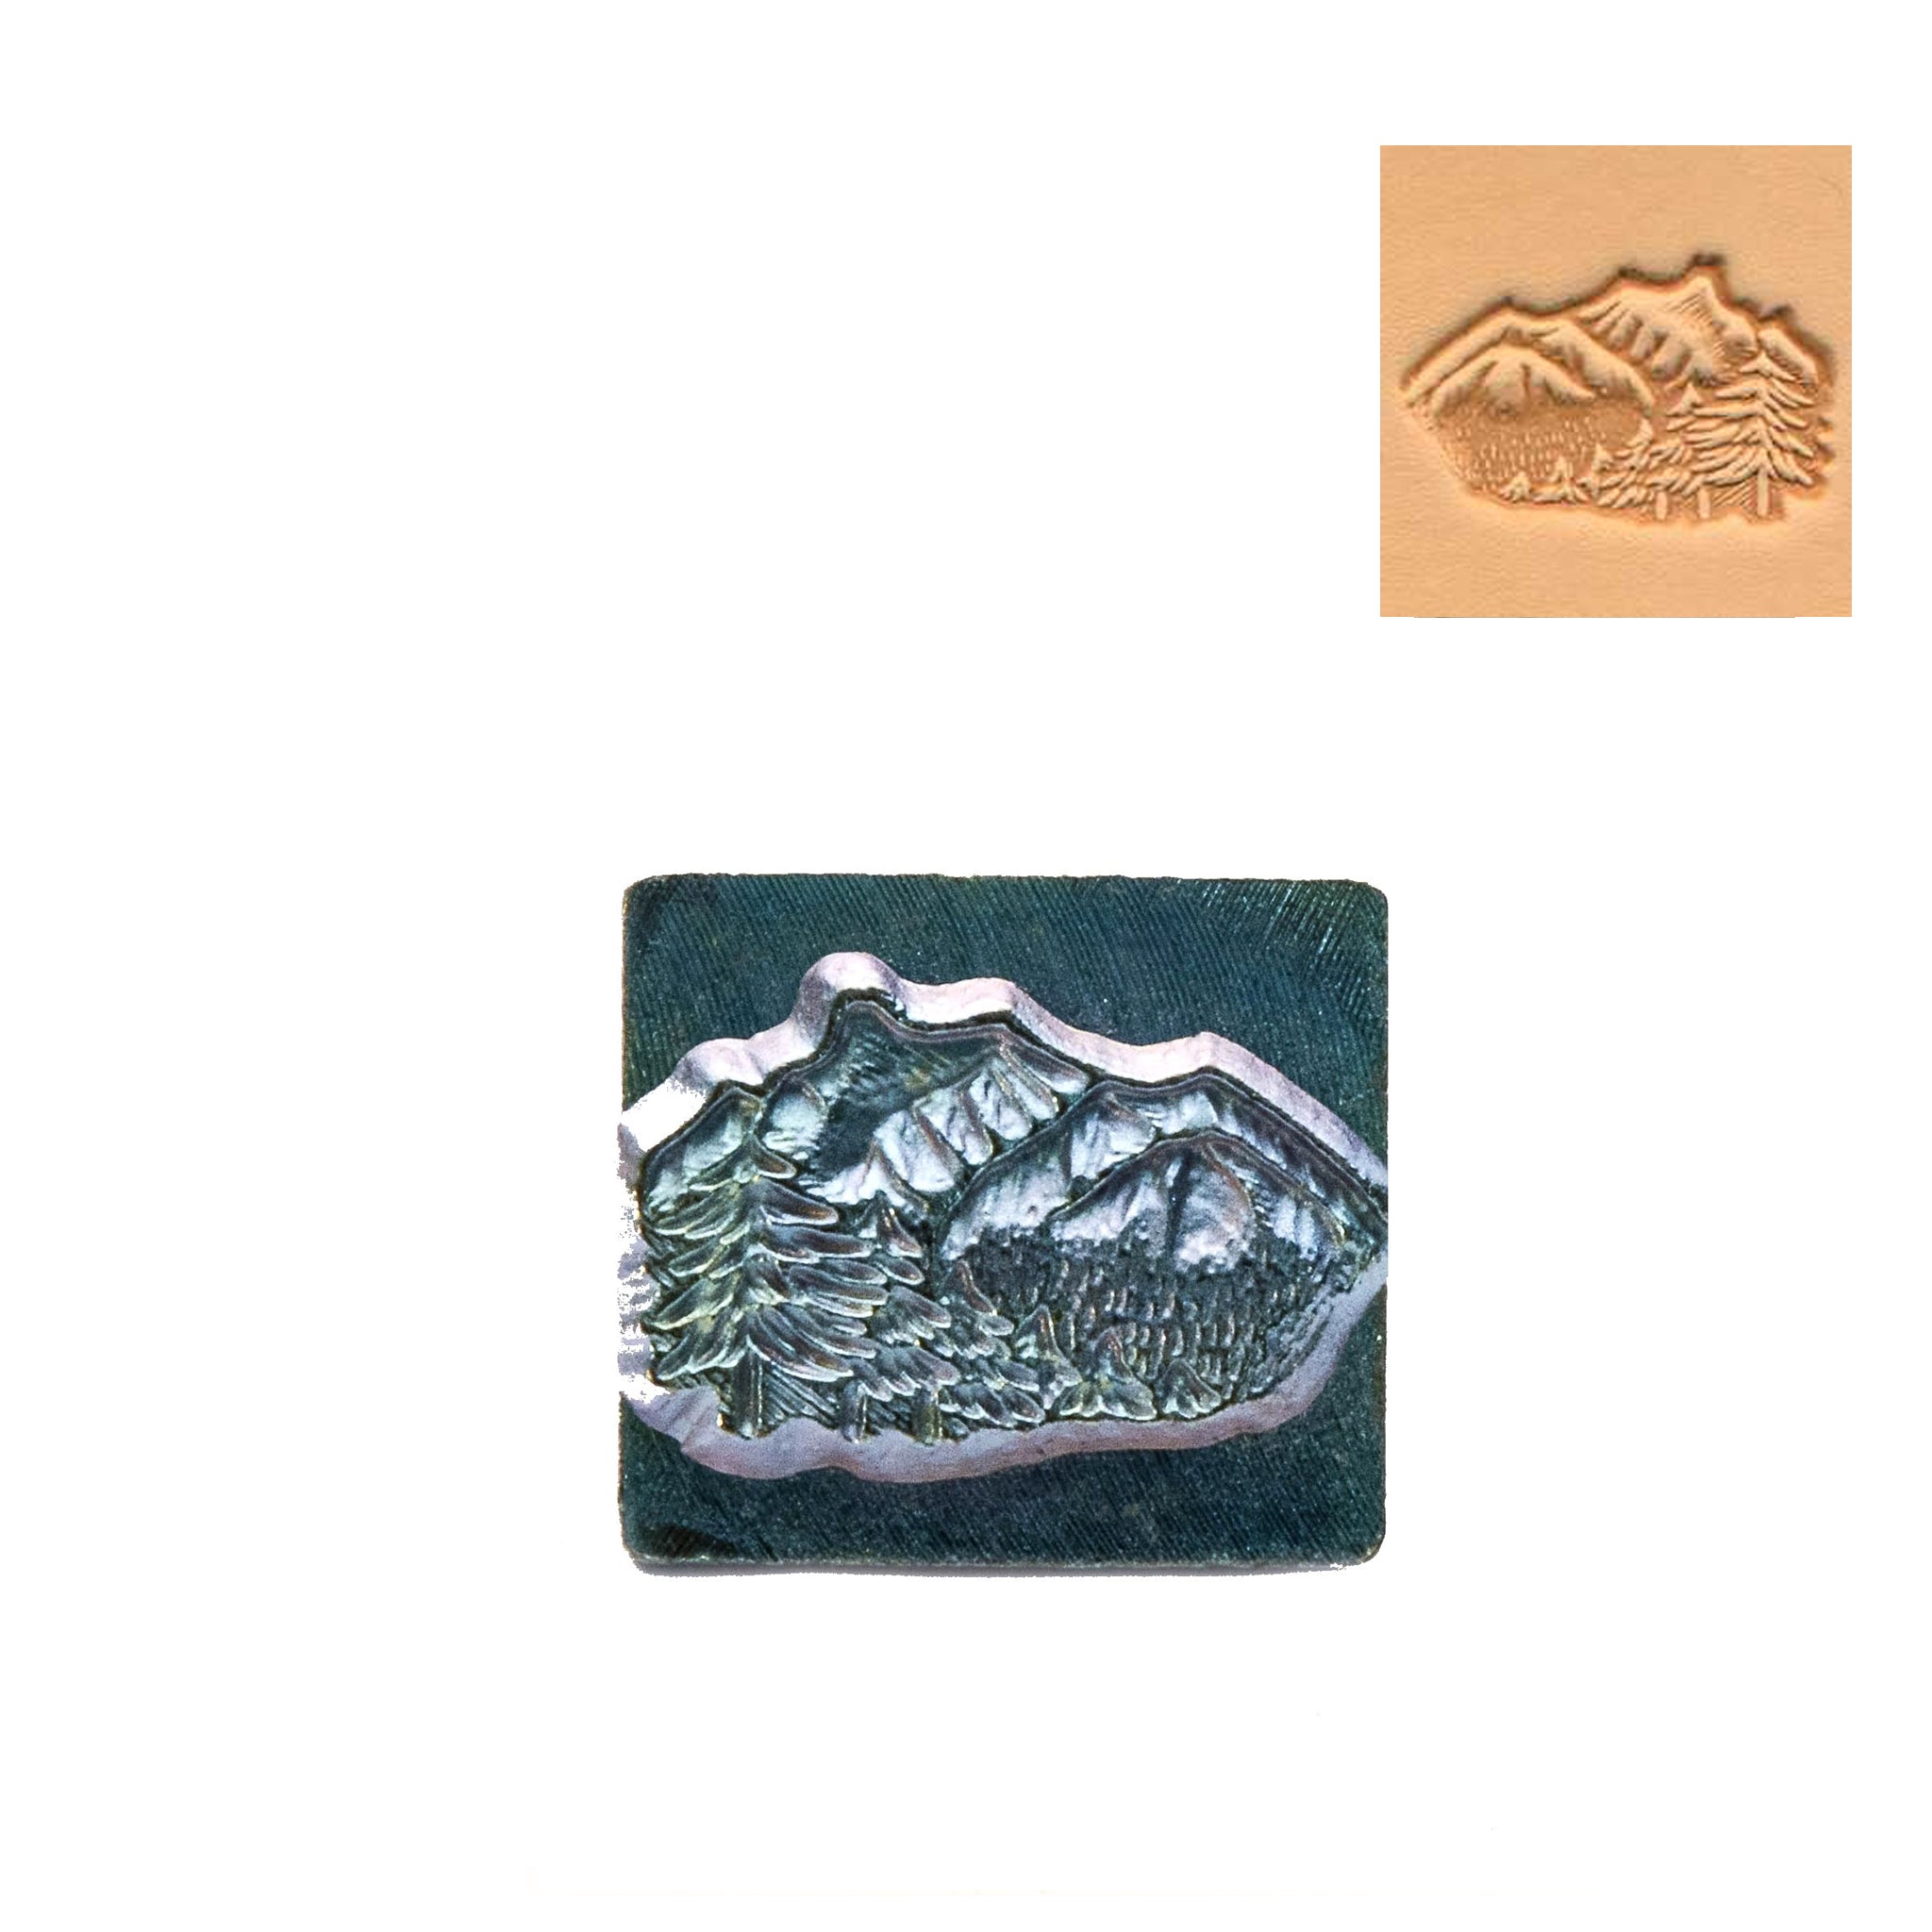 Mountain Scene 3D Embossing Stamp from Identity Leathercraft